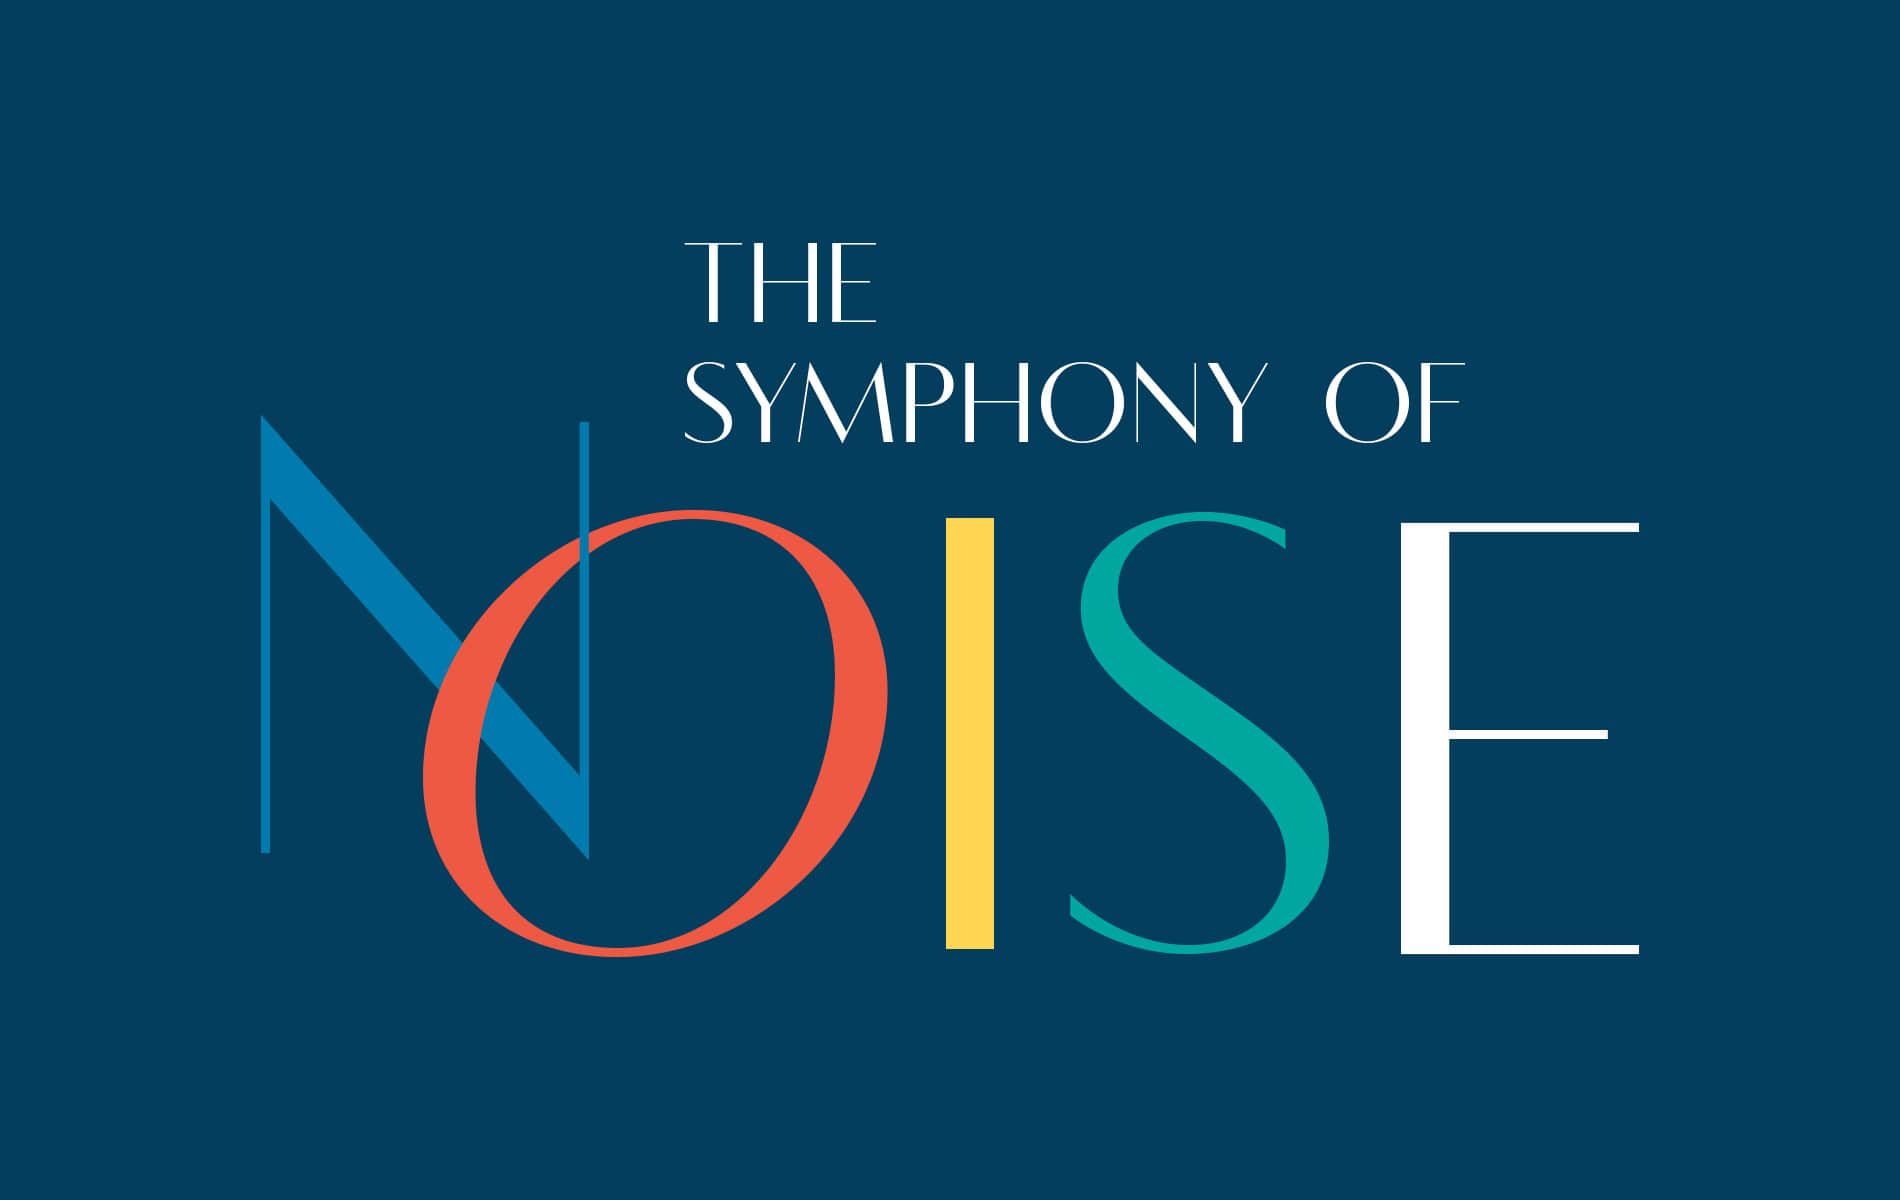 Nicholas S. Racheotes Column July 2019 Art & Artists Issue - The Symphony of Noise